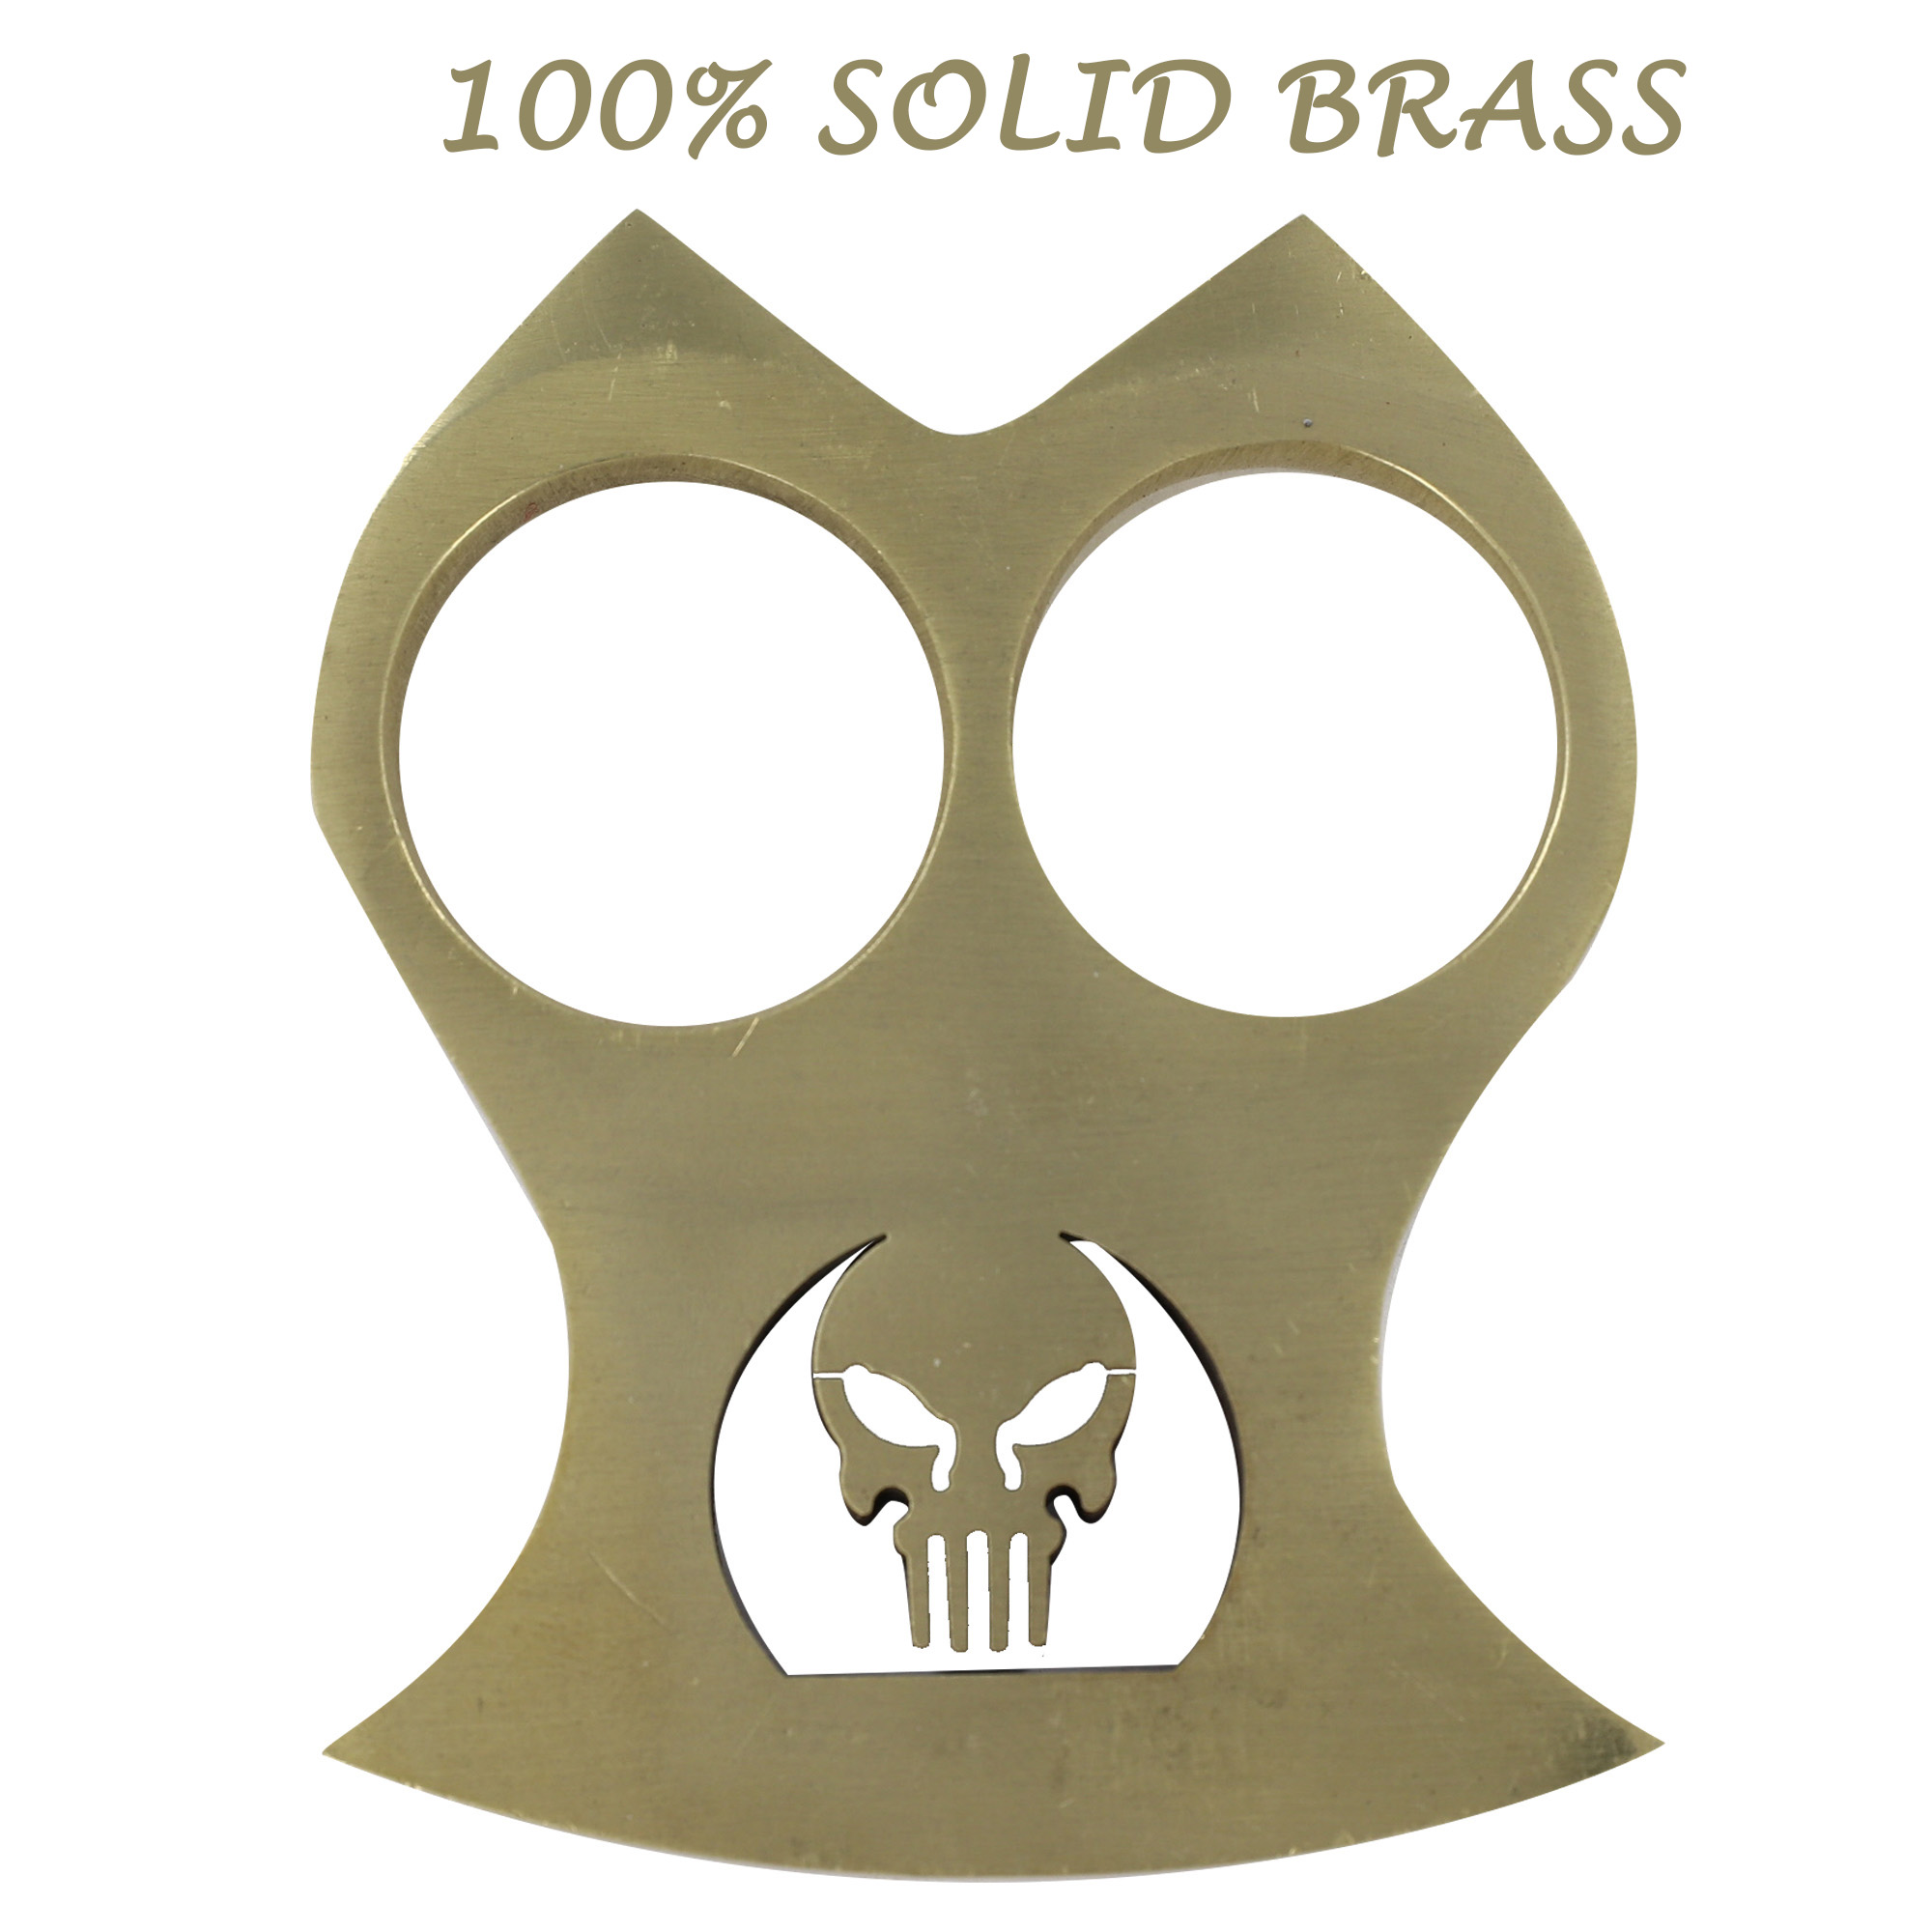 What A Hoot Pure Solid Brass Knuckle Duster Novelty Paper Weight